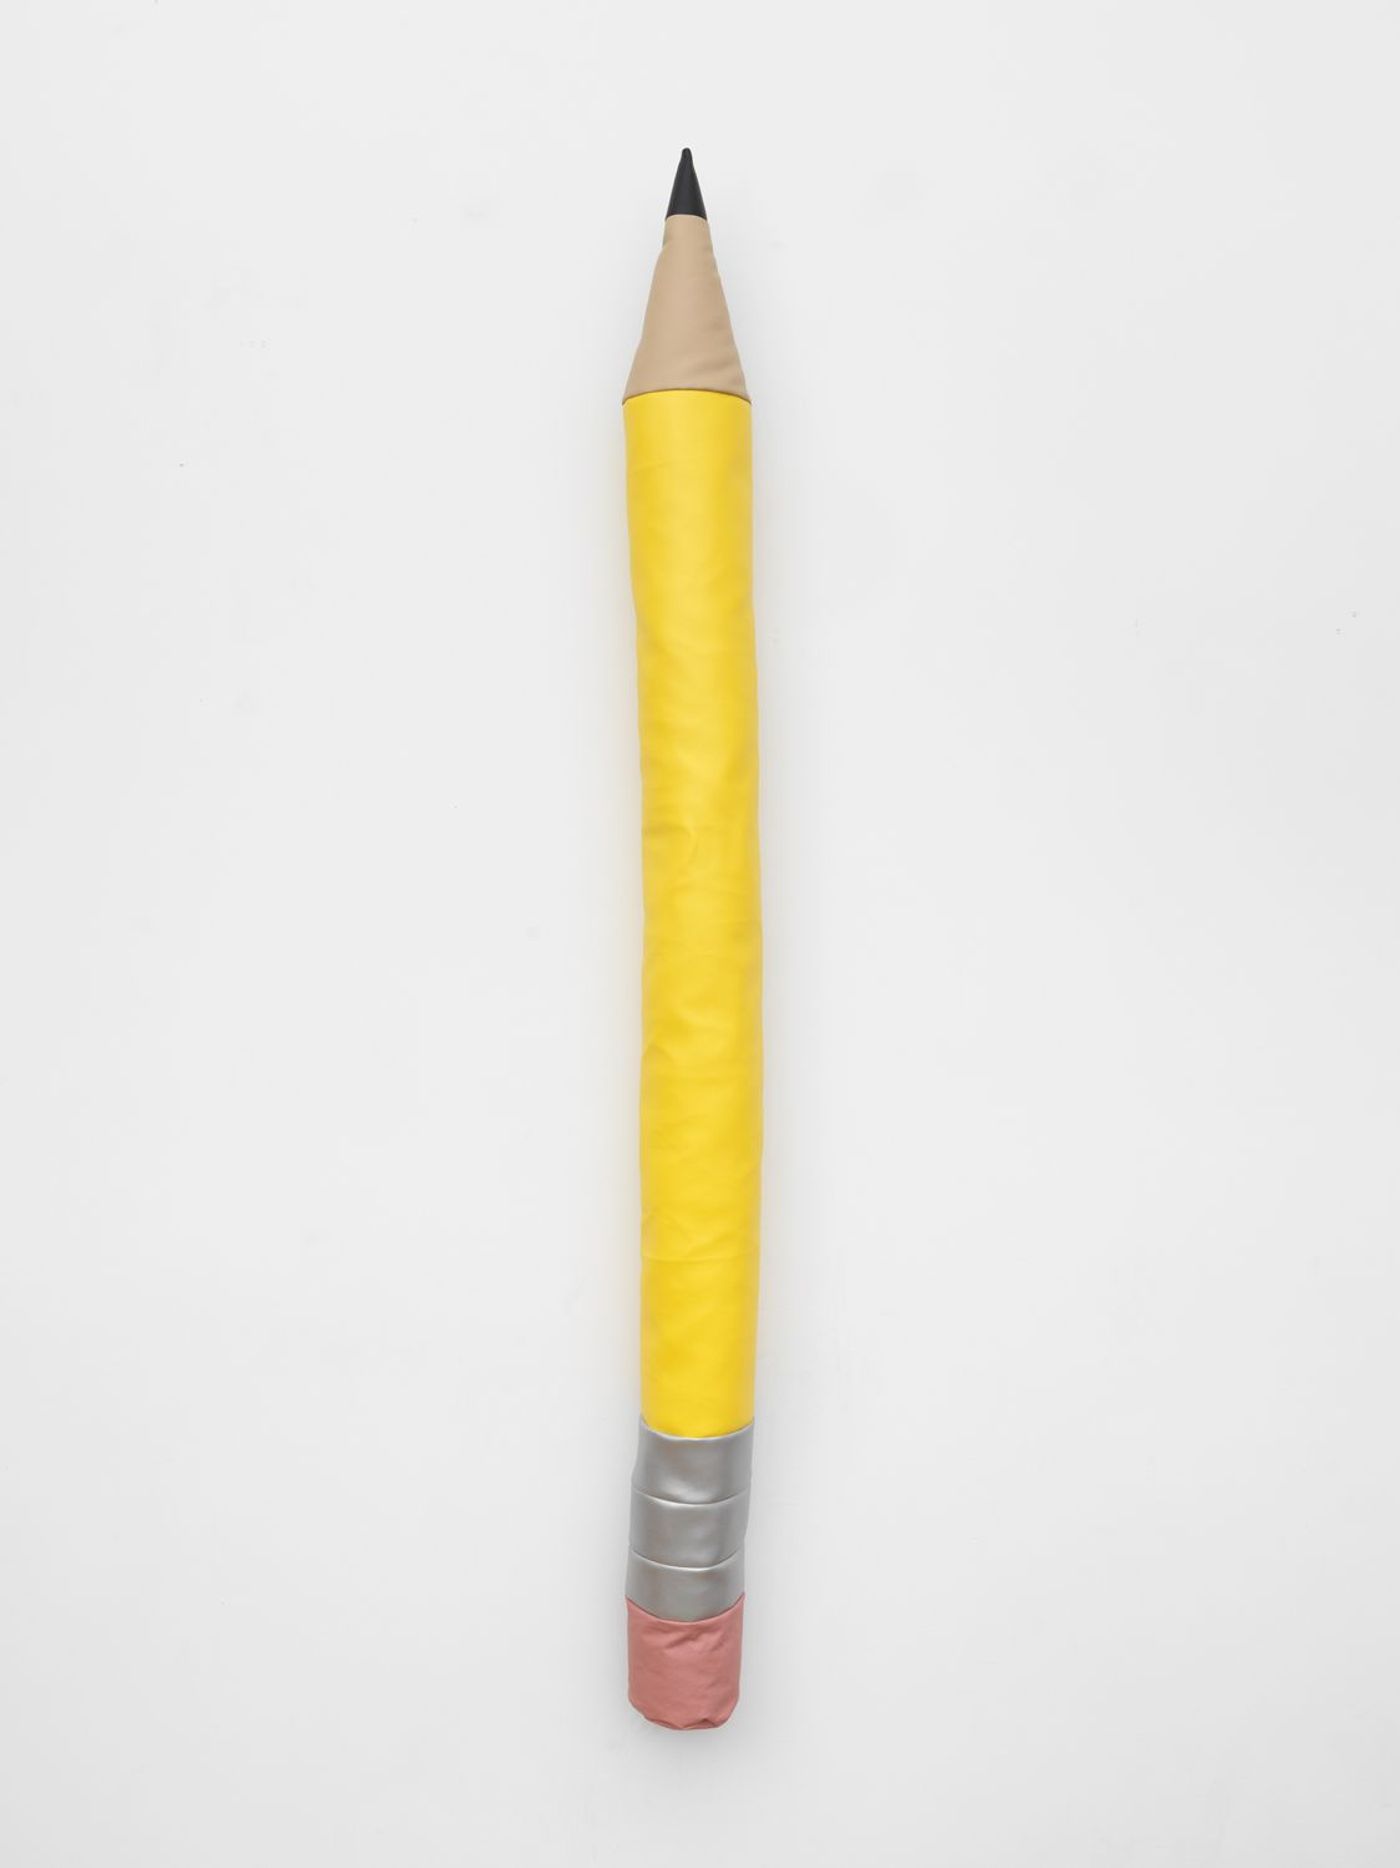 Image of Soft Pencil, 2019: Vinyl and polyfill